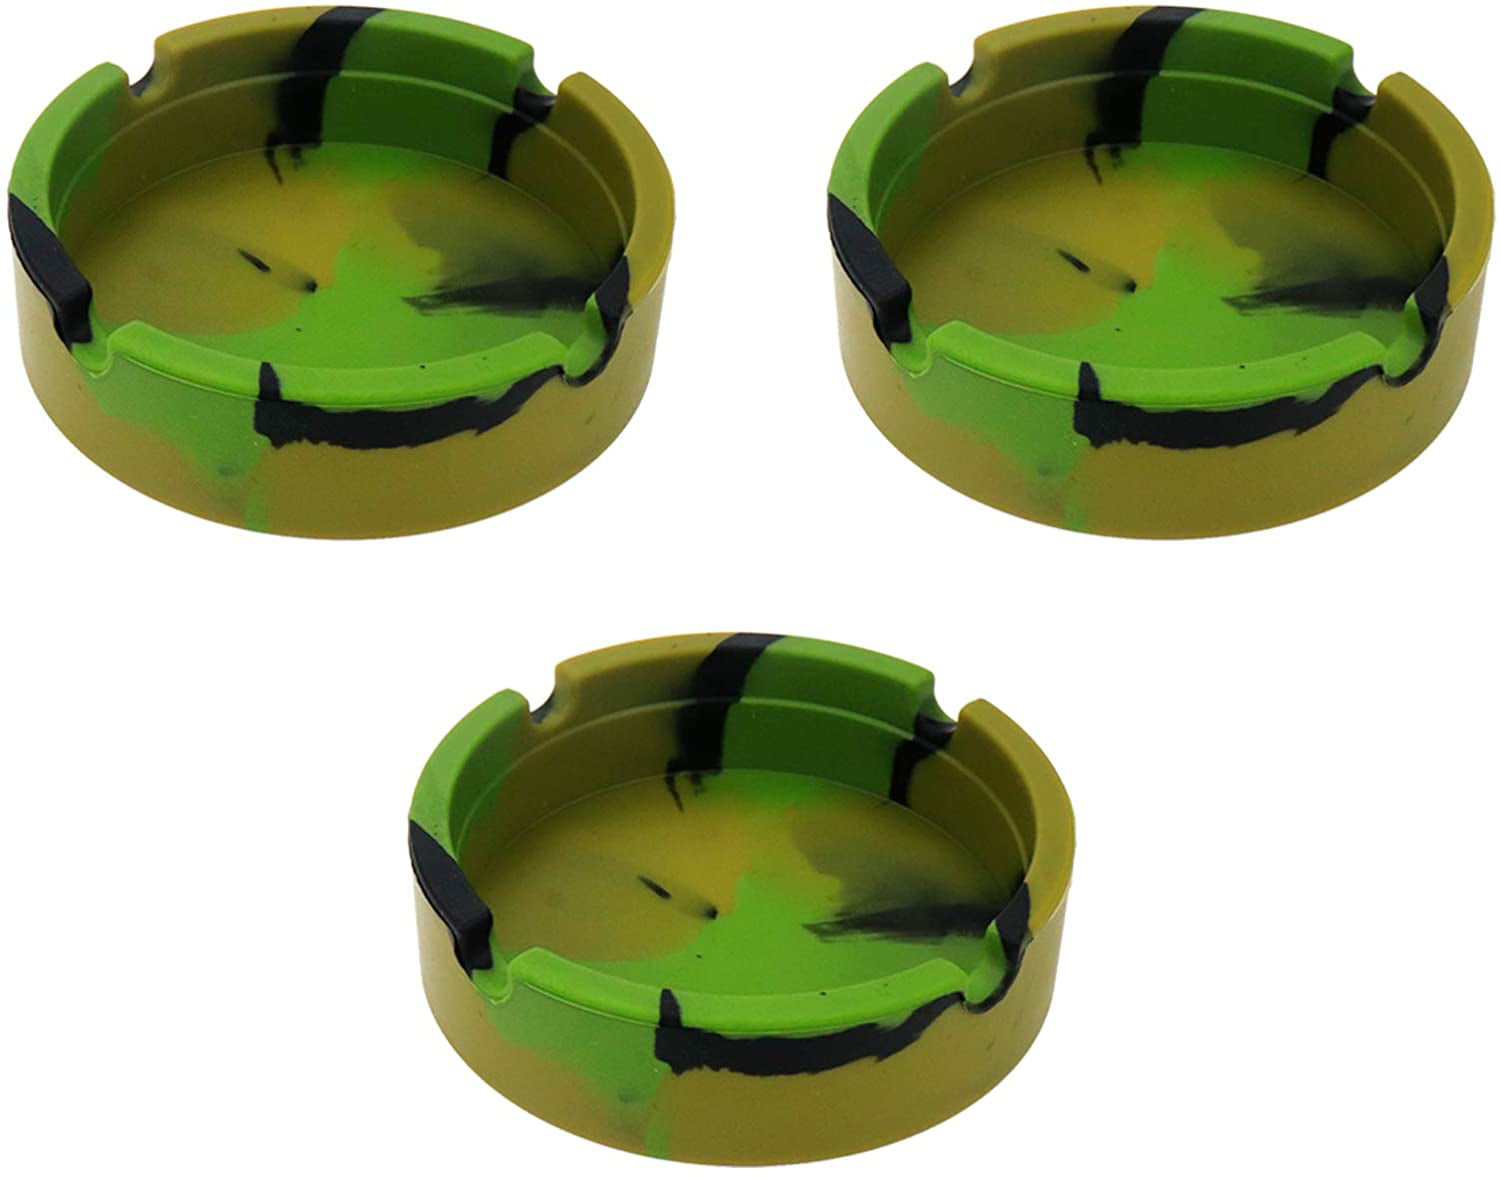 Camouflage Soft Rubber Silicone Ashtray Heat Resistant Eco-Friendly Home Decor 